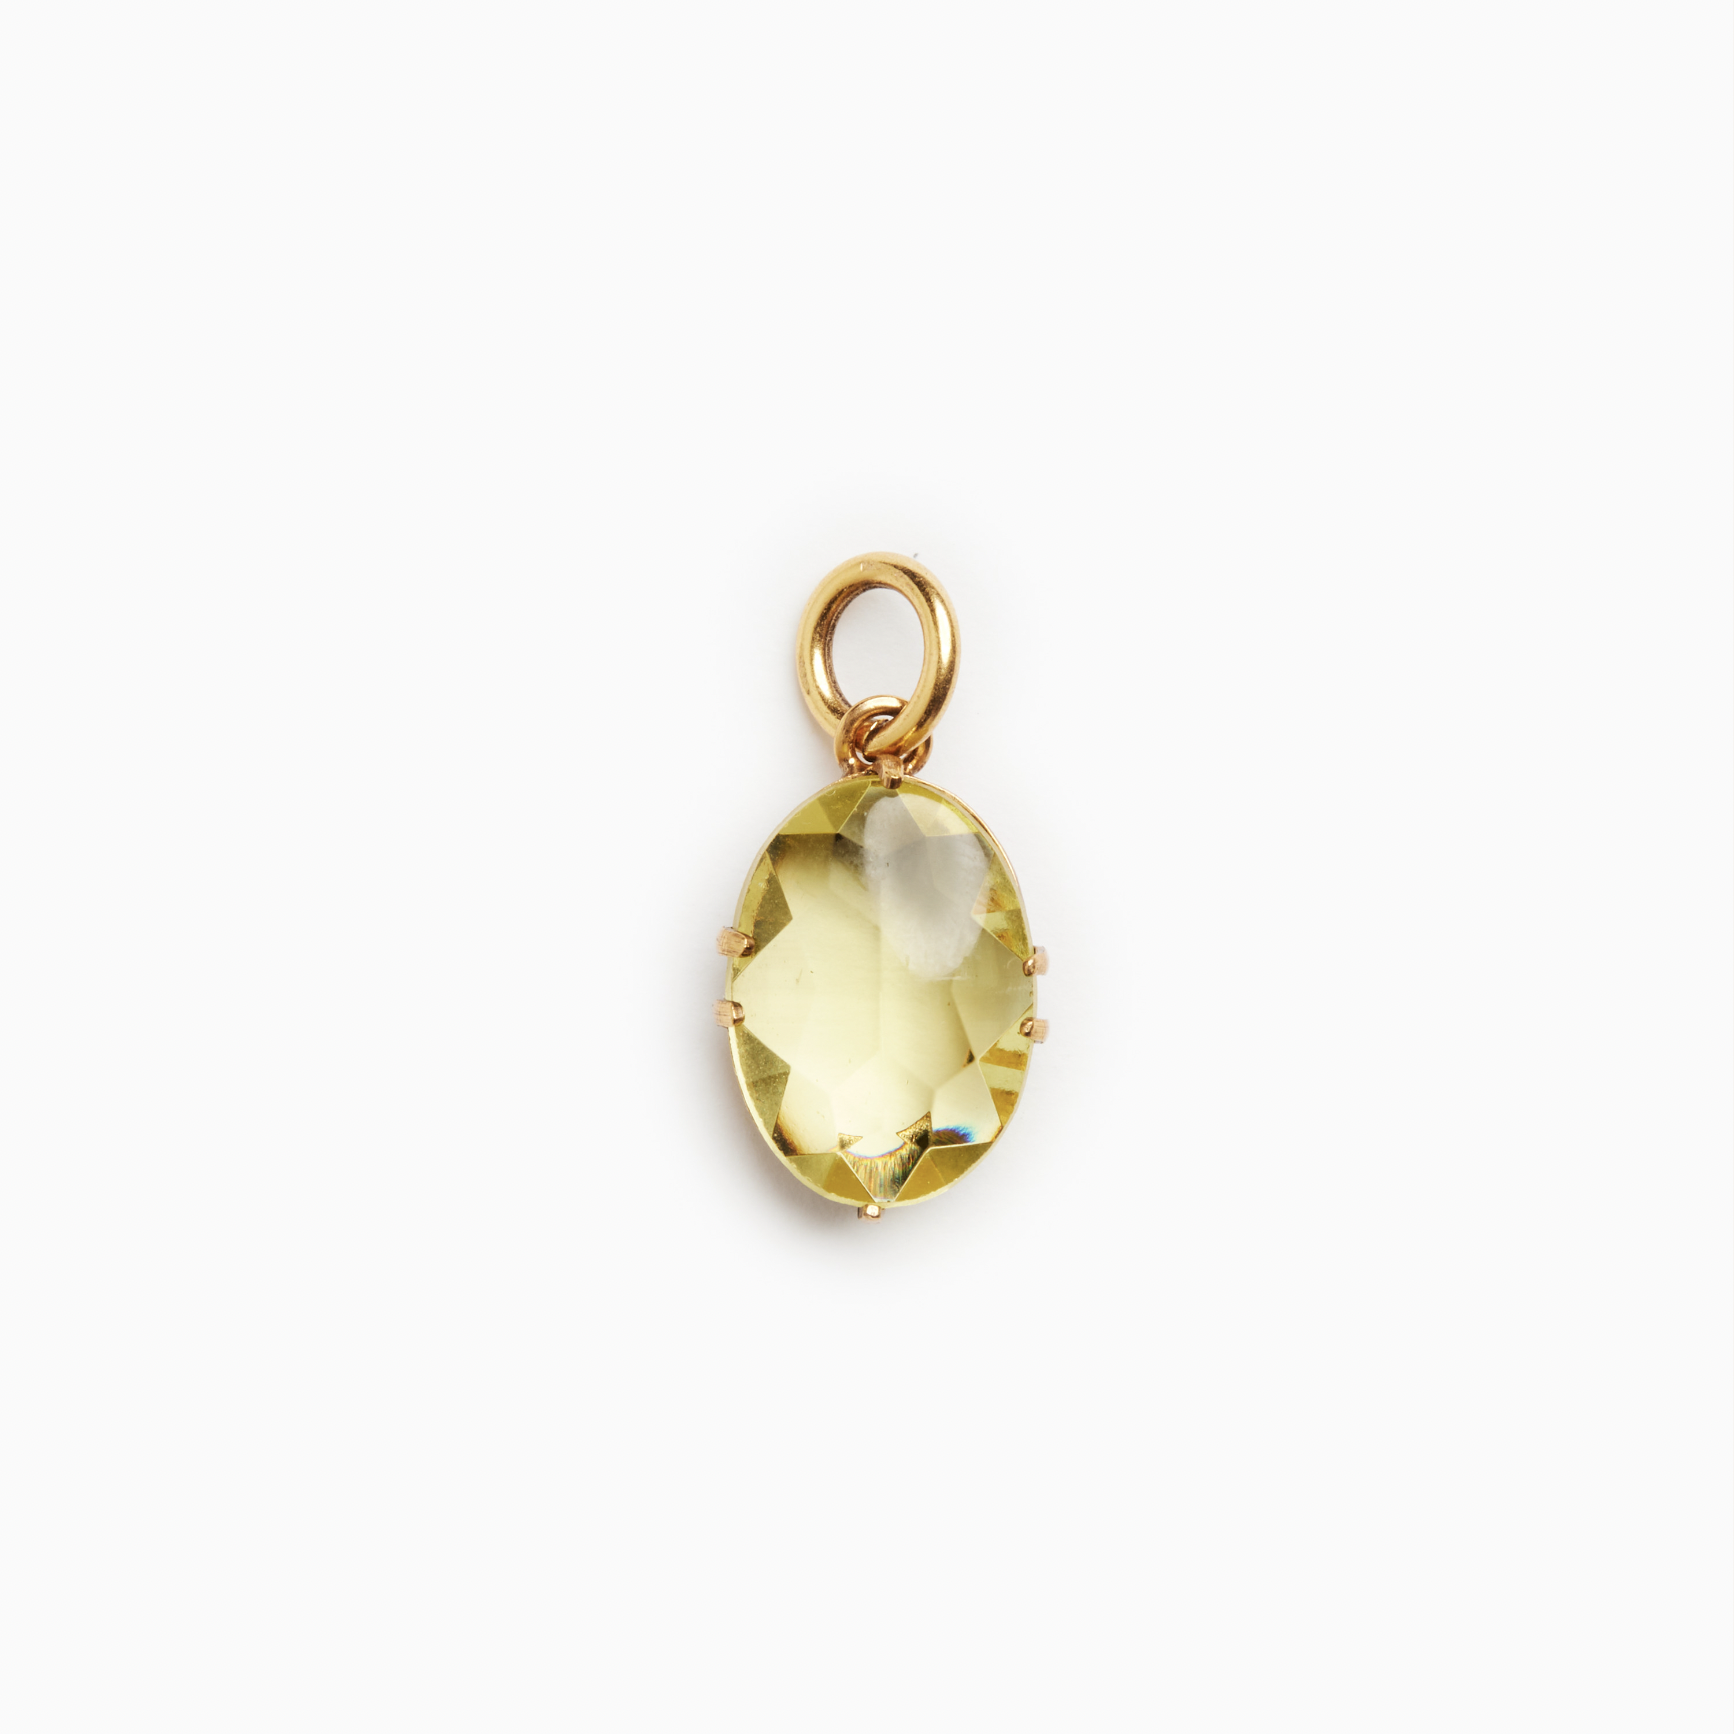 Earring Charms - Floating Stone Charms, Ana Luisa